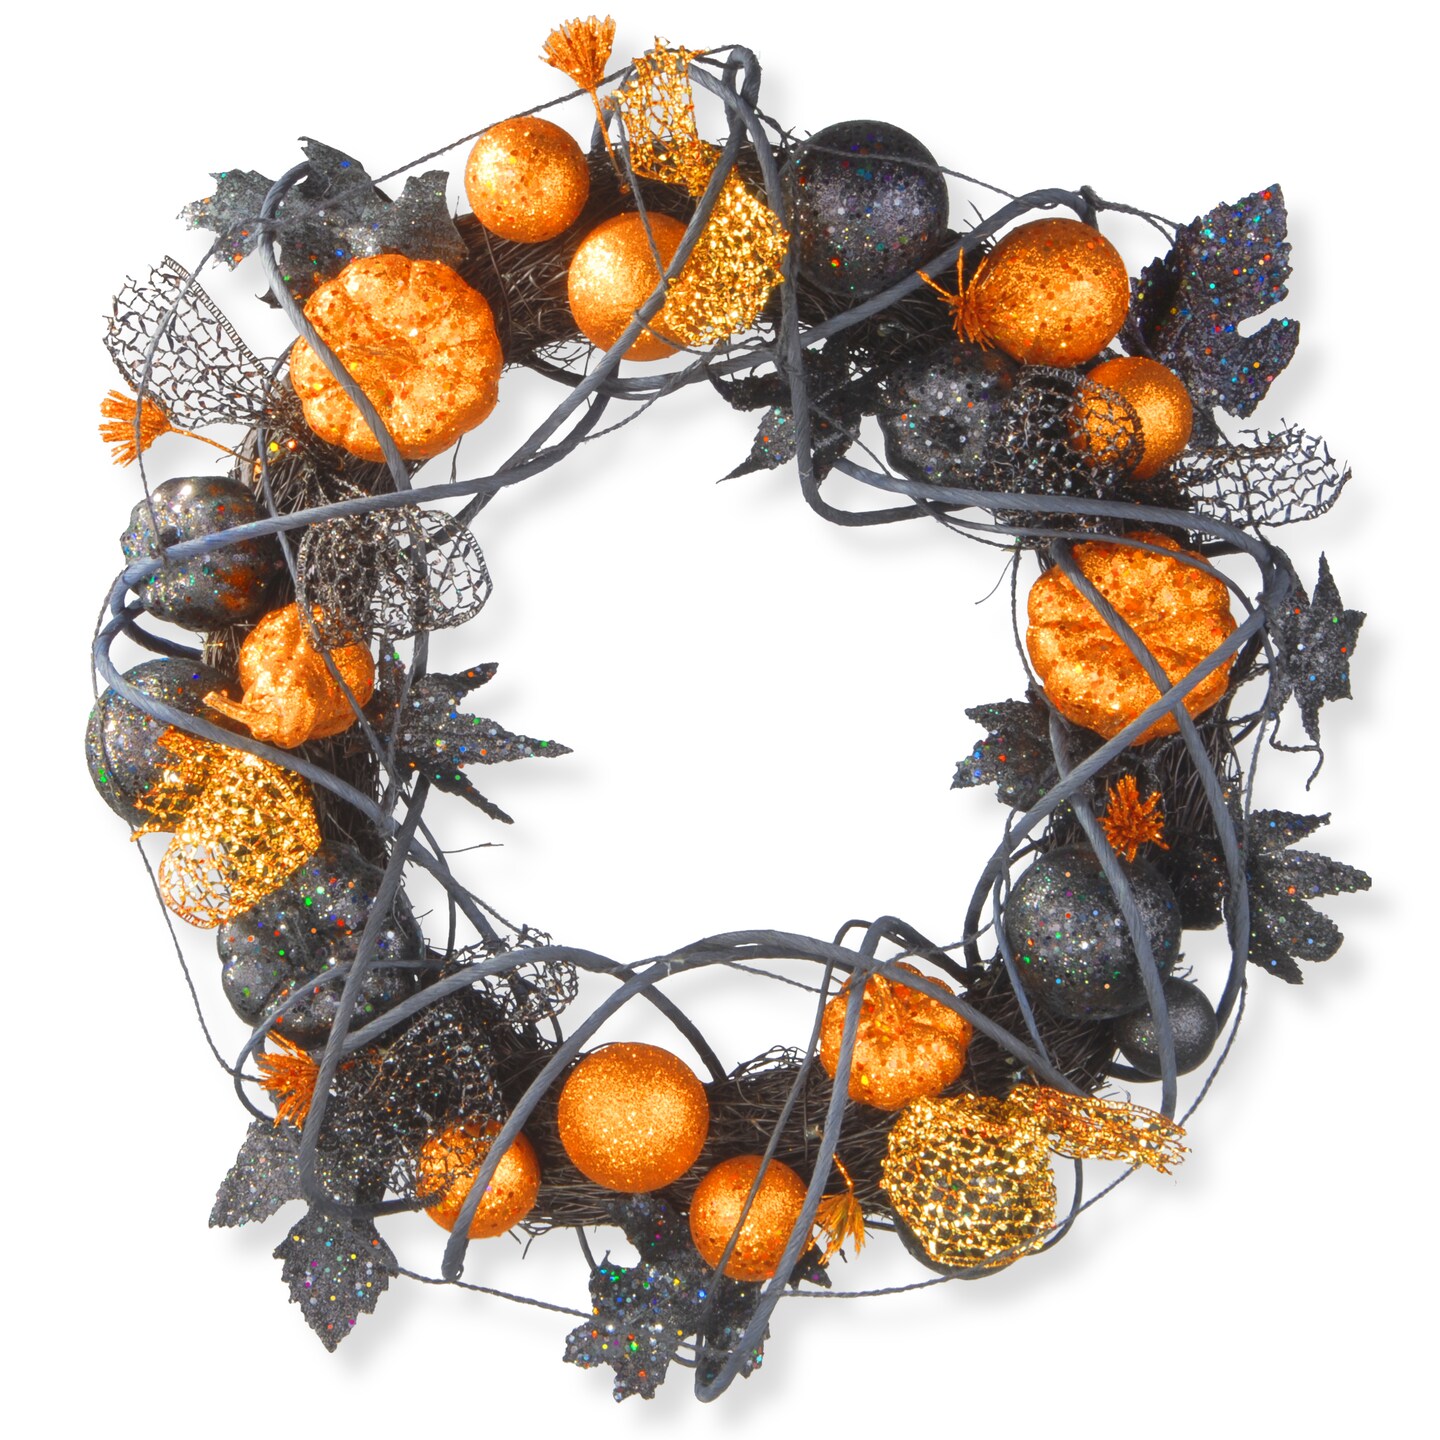 National Tree Company Artificial Halloween Wreath, Decorated with Multicolored Pumpkins, Gourds, Ball Ornaments, Ribbons, Vines, Assorted Leaves, Halloween Collection, 20 inches